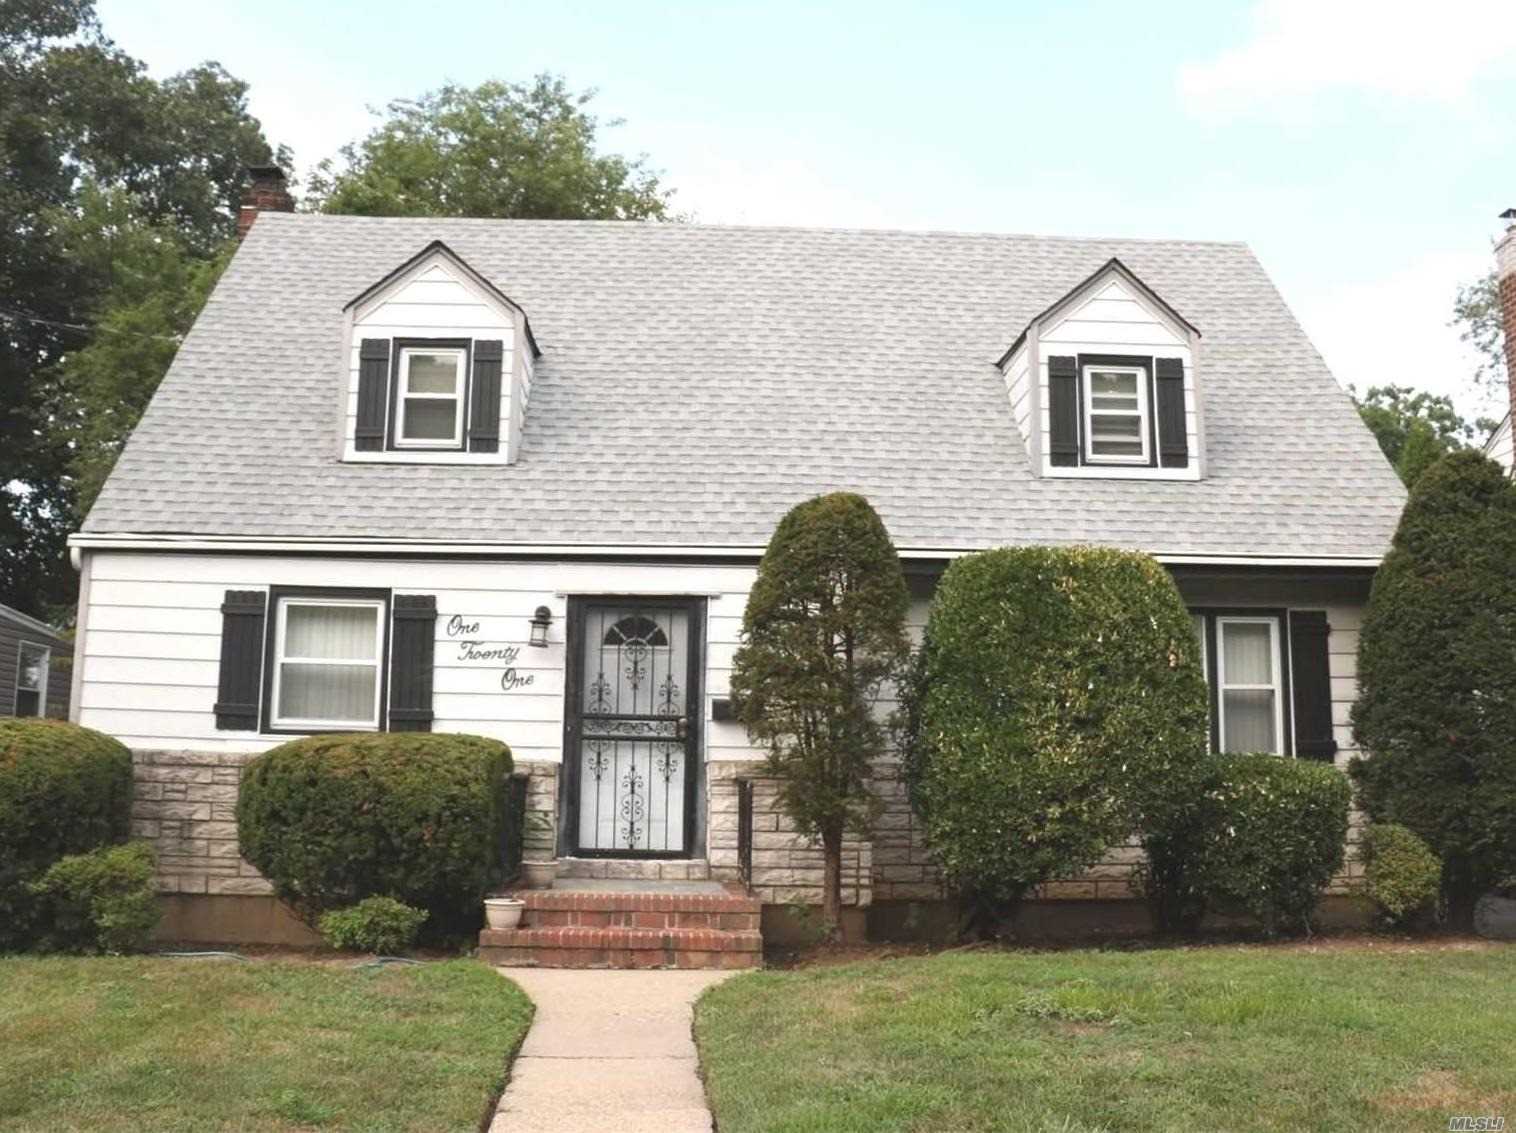 Spacious dormered cape on quiet tree lined street. 5 Bedrooms, 2 baths and full basement with tons of potential. New Roof, New updated kitchen with stainless steel appliances, formal dining room and bright airy living room. Lowest taxes in Hempstead. Great Price. Show easy